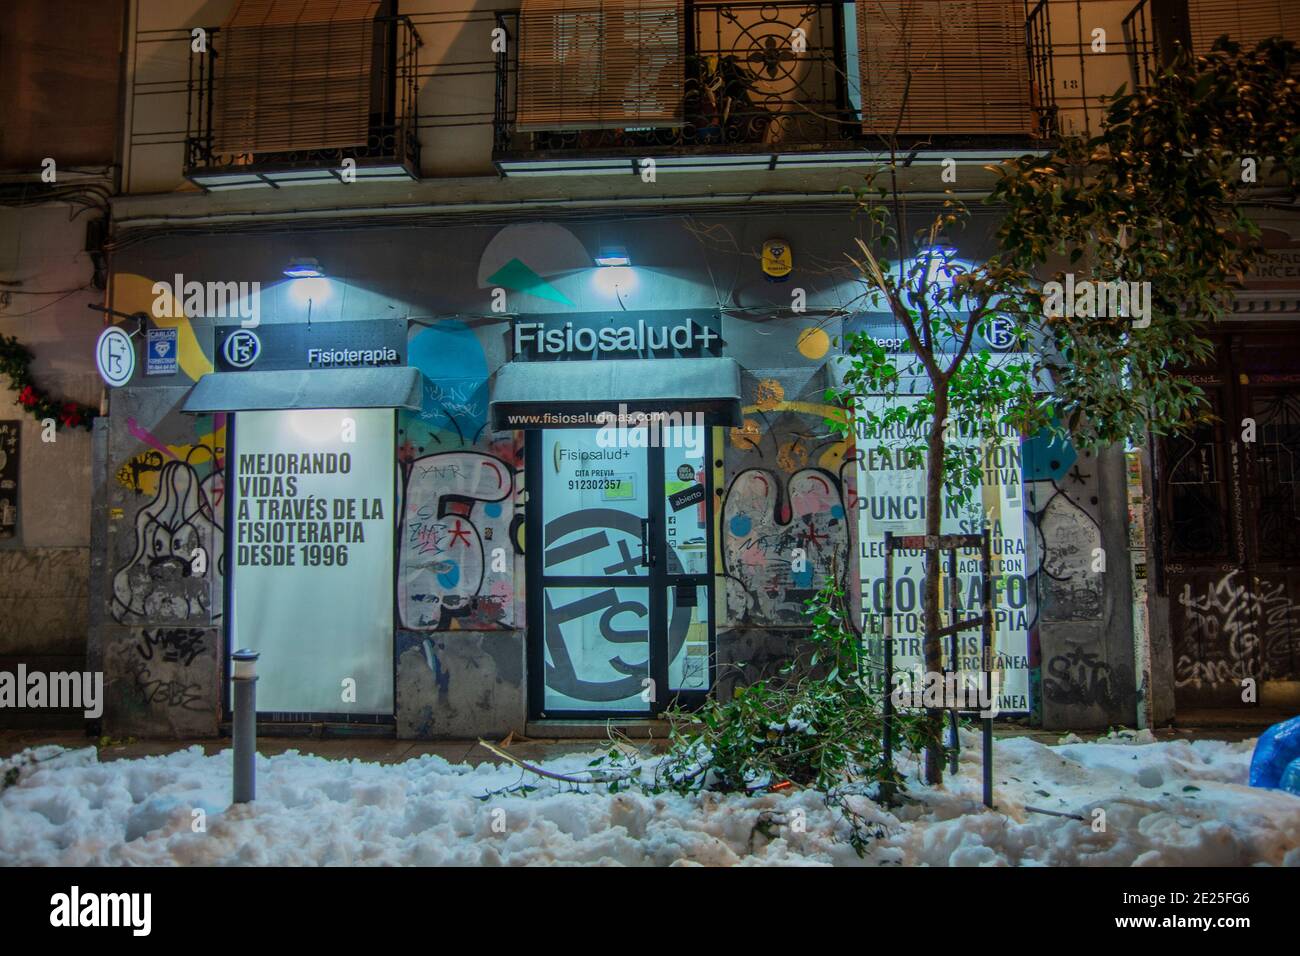 Madrid, Spain. 11th Jan, 2021. More than 150,000 trees could be affected by the storm Filomena. Also hundreds of wrecked vehicles on the streets of Madrid. The snow is still accumulated on the street furniture and on the roofs and you have to be very careful when walking on the street.After the heavy snowfall, the damage was seen: Streets and avenues with thousands of trunked trees and broken branches on the ground. In Fuencarral street the scene was as if a cataclysm had occurred (Photo by Alberto Sibaja/Pacific Press) Credit: Pacific Press Media Production Corp./Alamy Live News Stock Photo